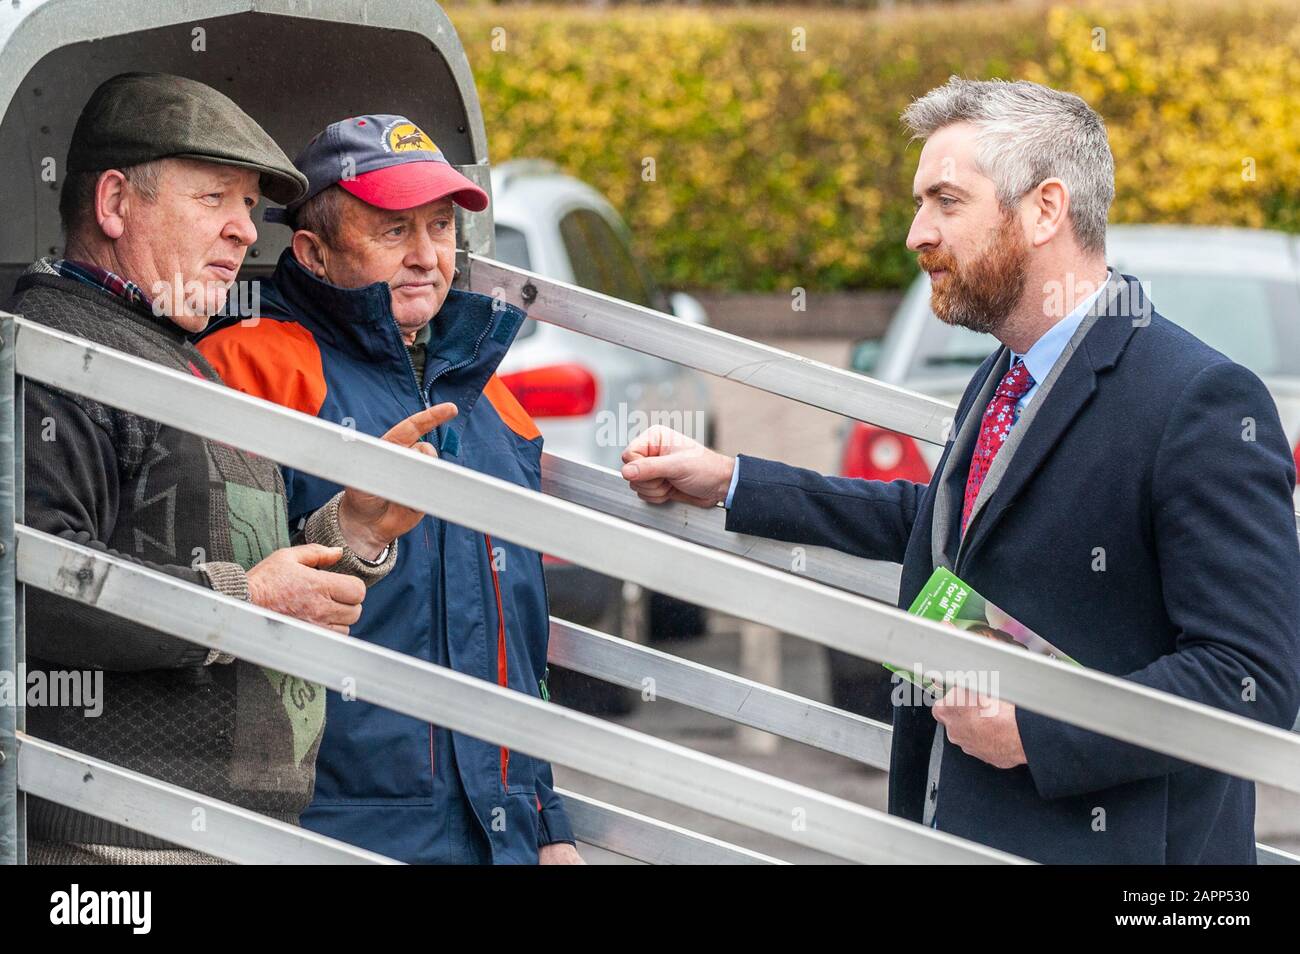 Bantry, West Cork, Ireland. 24th Jan, 2020. Election candidate Cllr. Christopher O'Sullivan was in Bantry Market today, canvassing for votes with his team. Credit: Andy Gibson/Alamy Live News Stock Photo